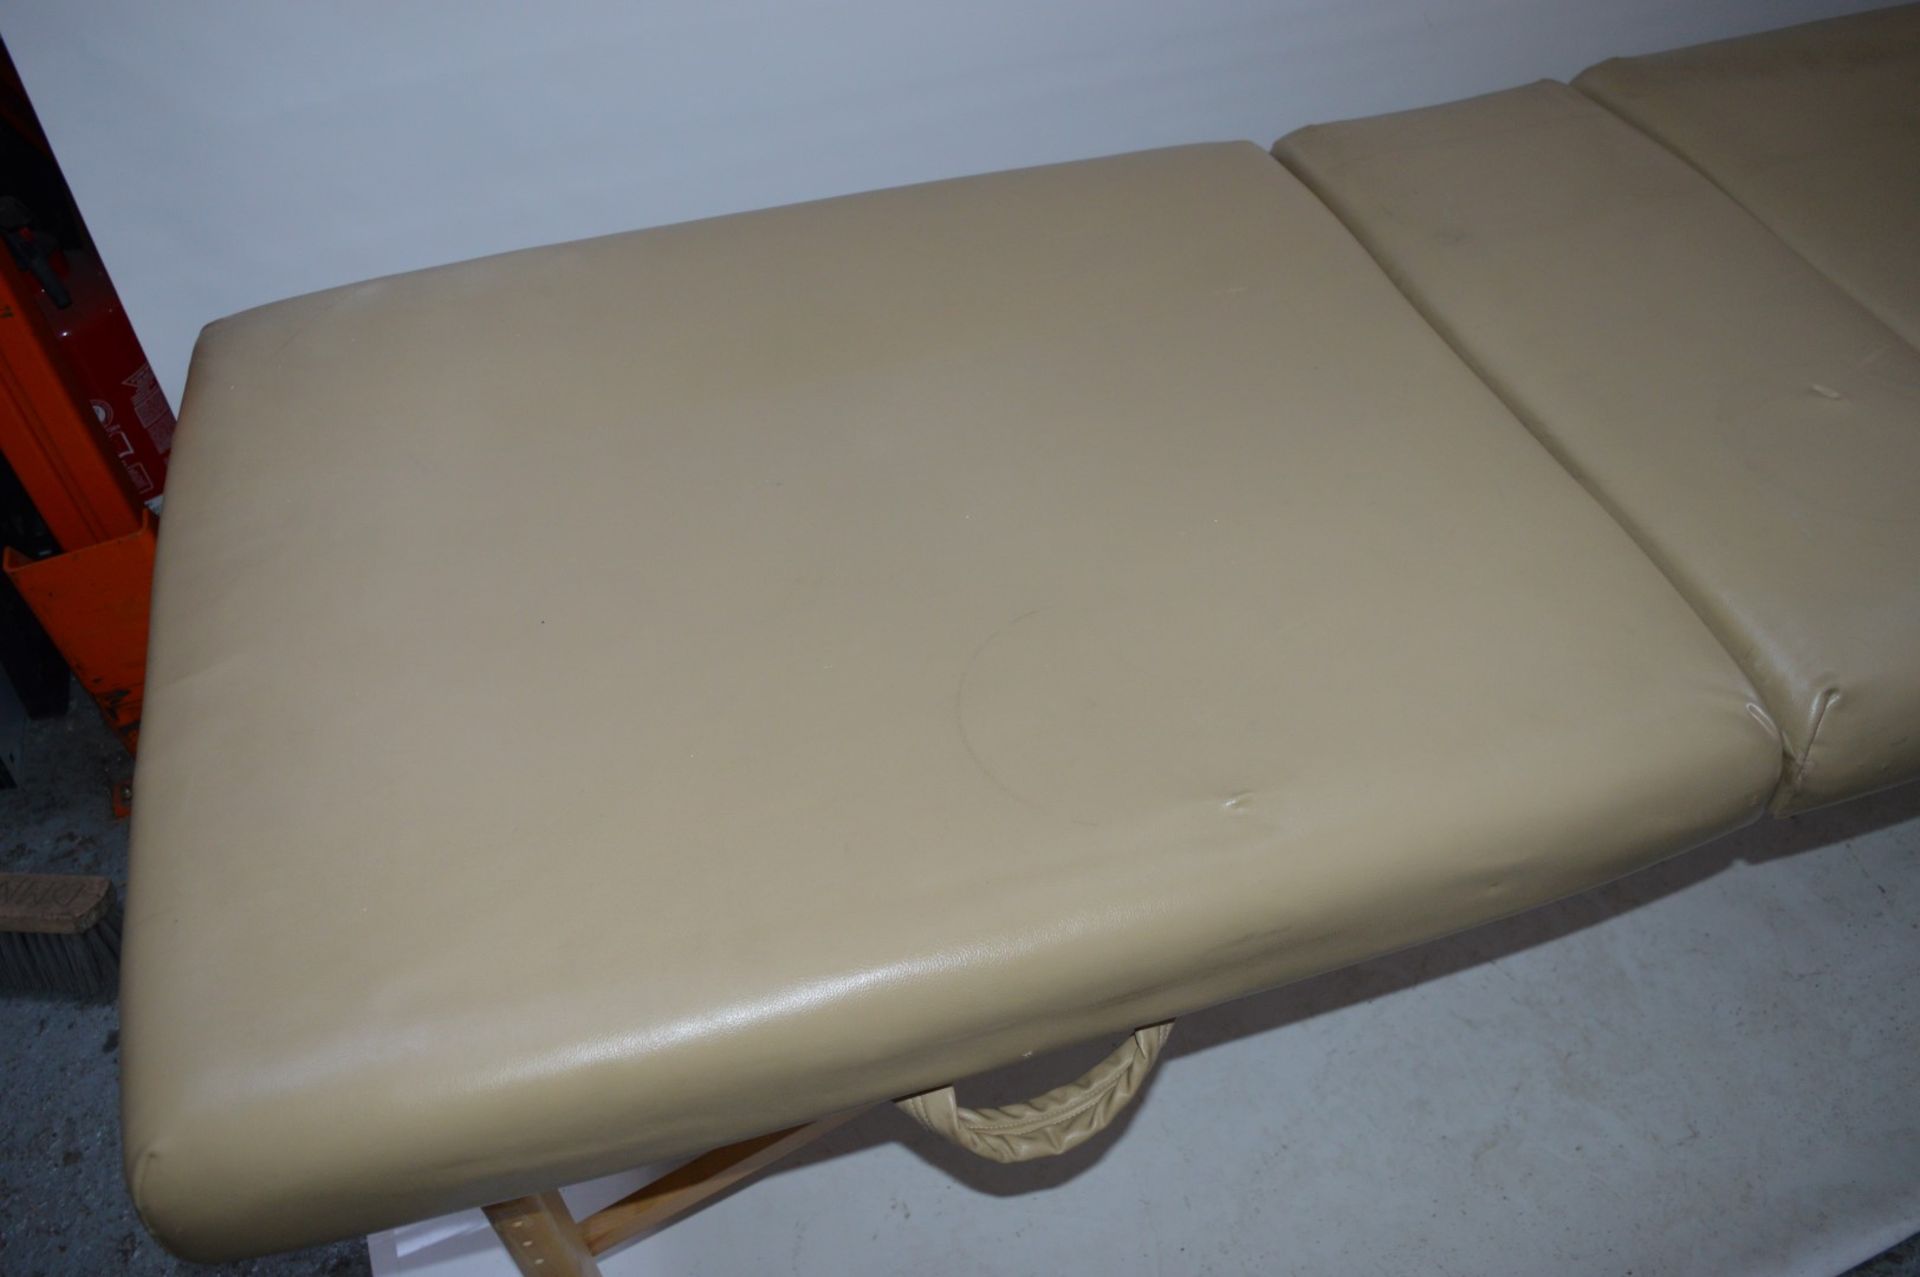 1 x Master Chicago Massage Table - Fold Up Massage Table Suitable For Home or Business Use - Very - Image 4 of 5